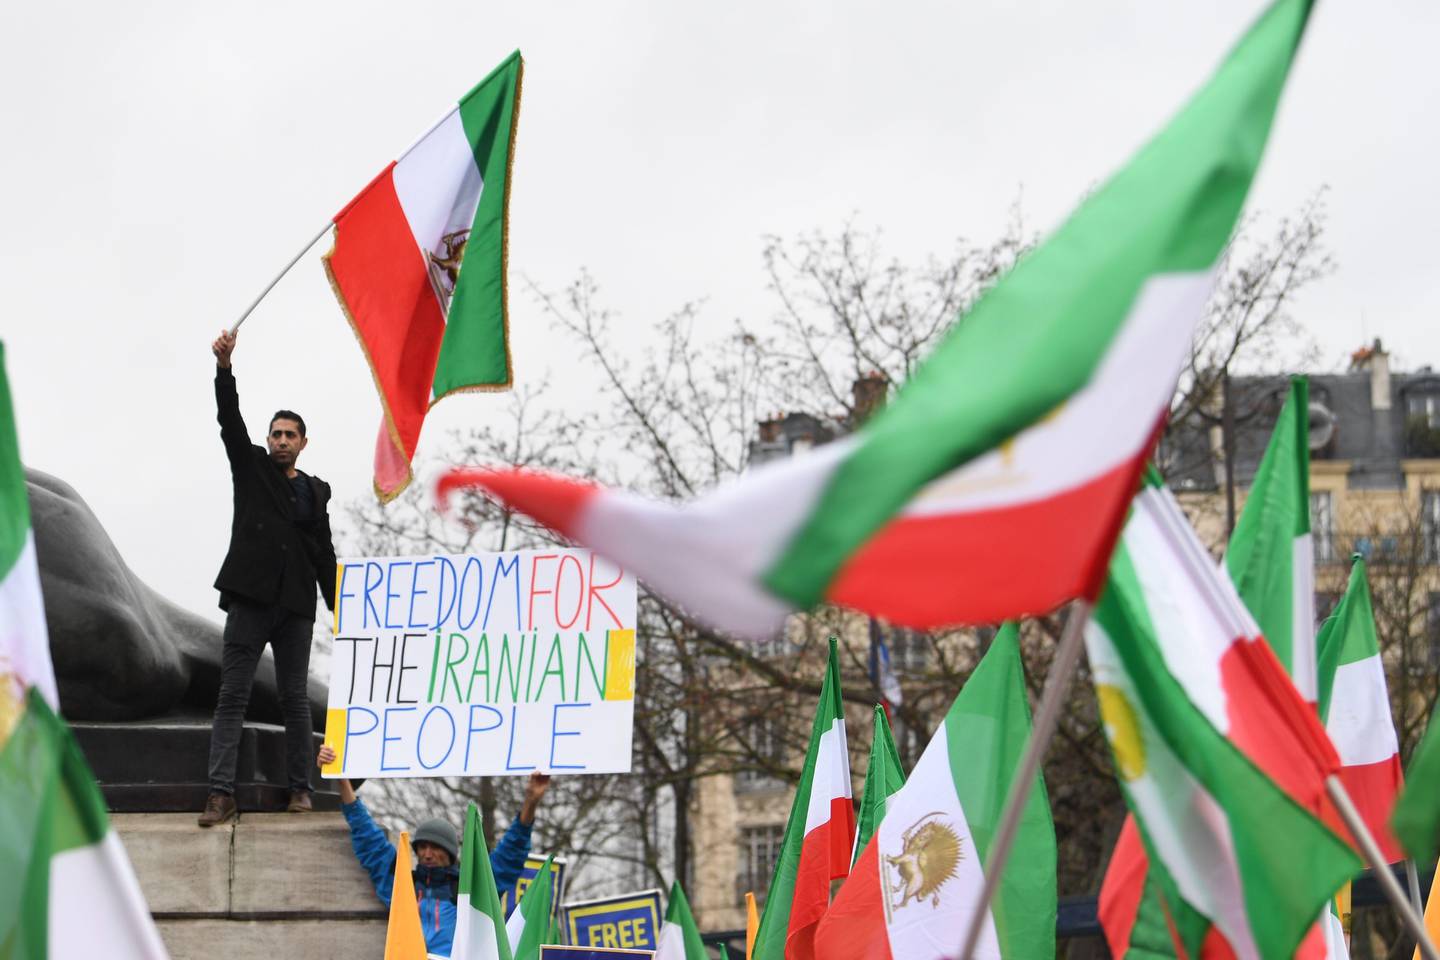 People wave former Iranian flags during a demonstration of the exiled Iranian opposition to protest against the celebration in Iran of the 40th anniversary of the Islamic Revolution, on February 8, 2019 in Paris. (Photo by Alain JOCARD / AFP)